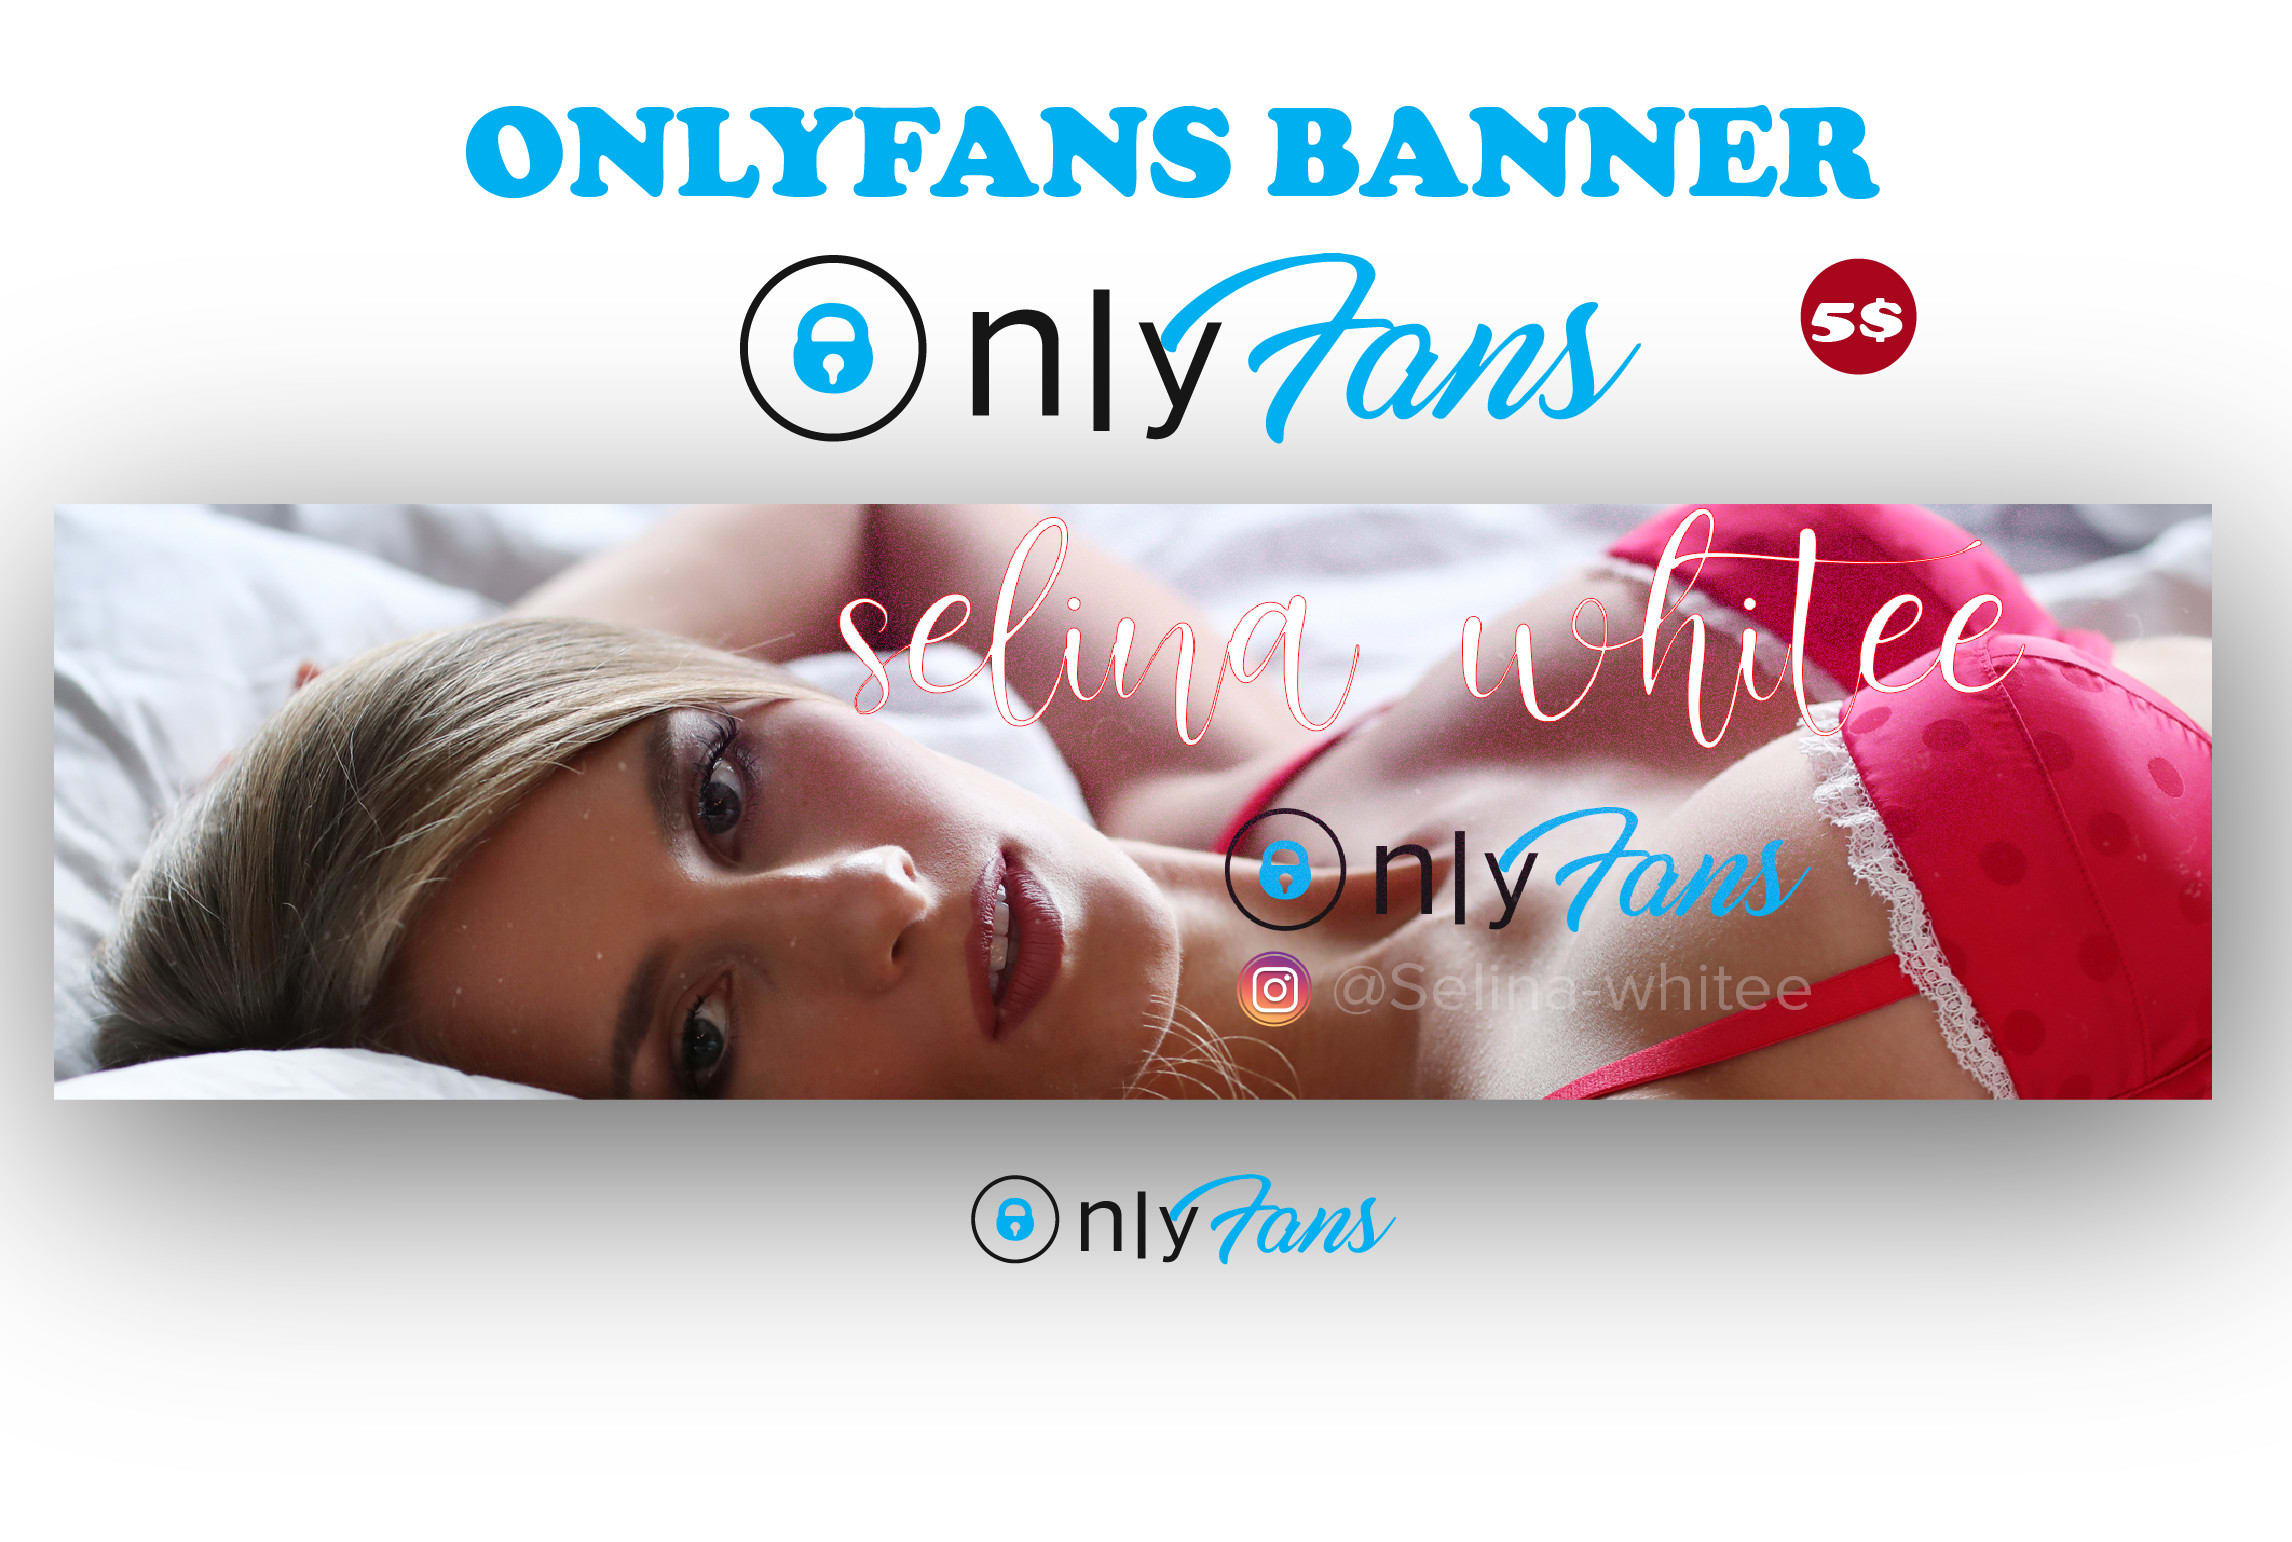 Only fans banners